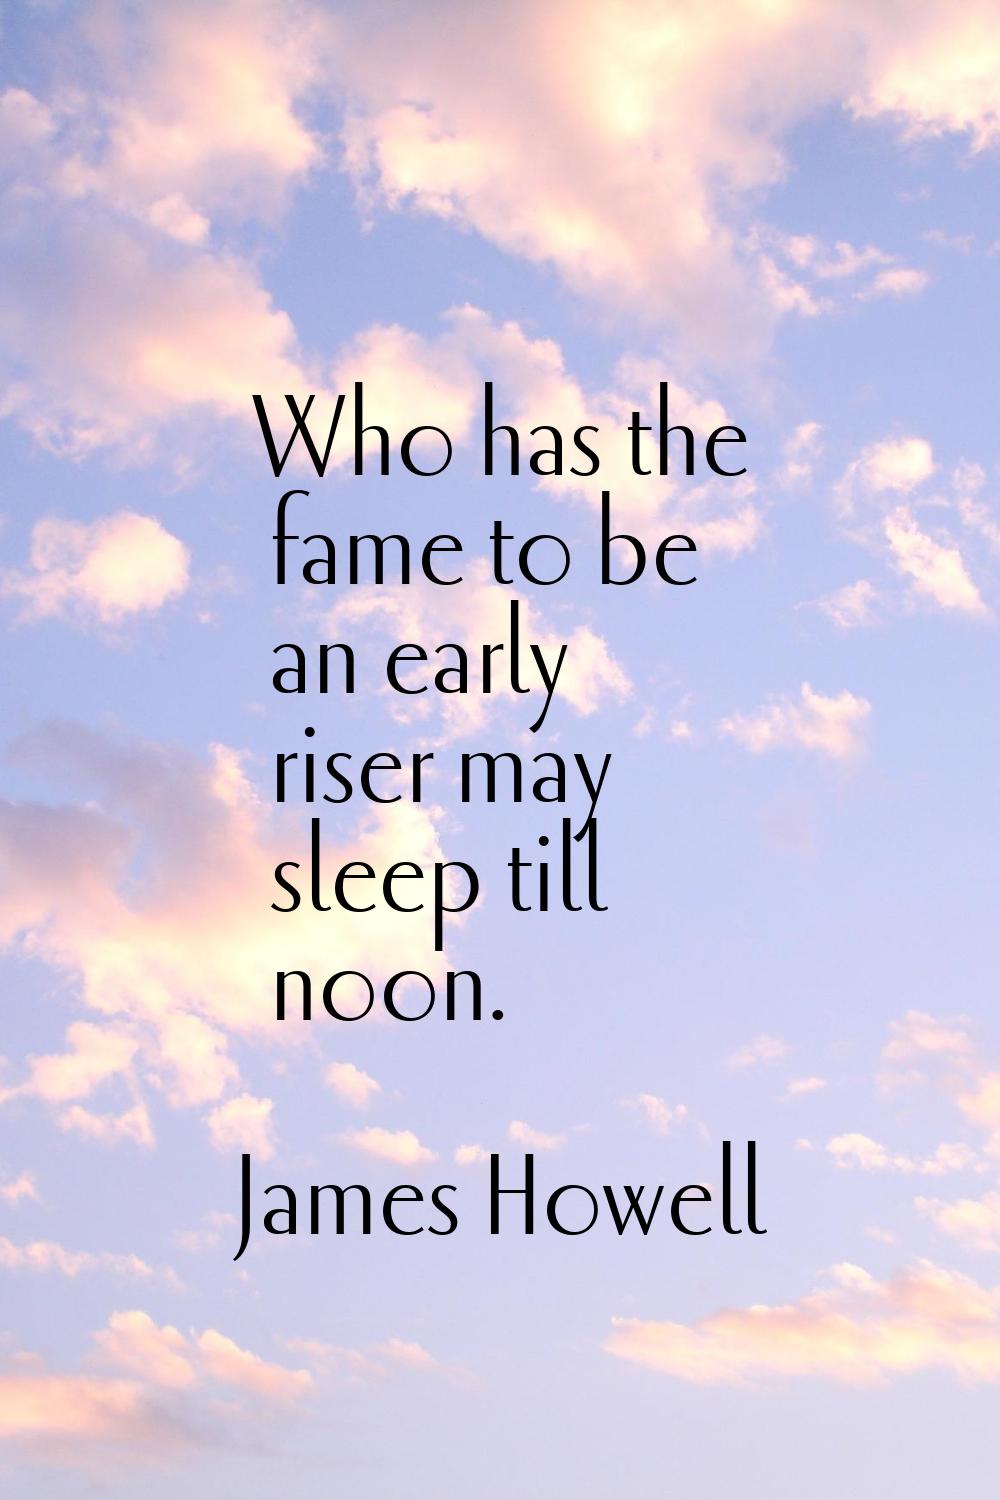 Who has the fame to be an early riser may sleep till noon.